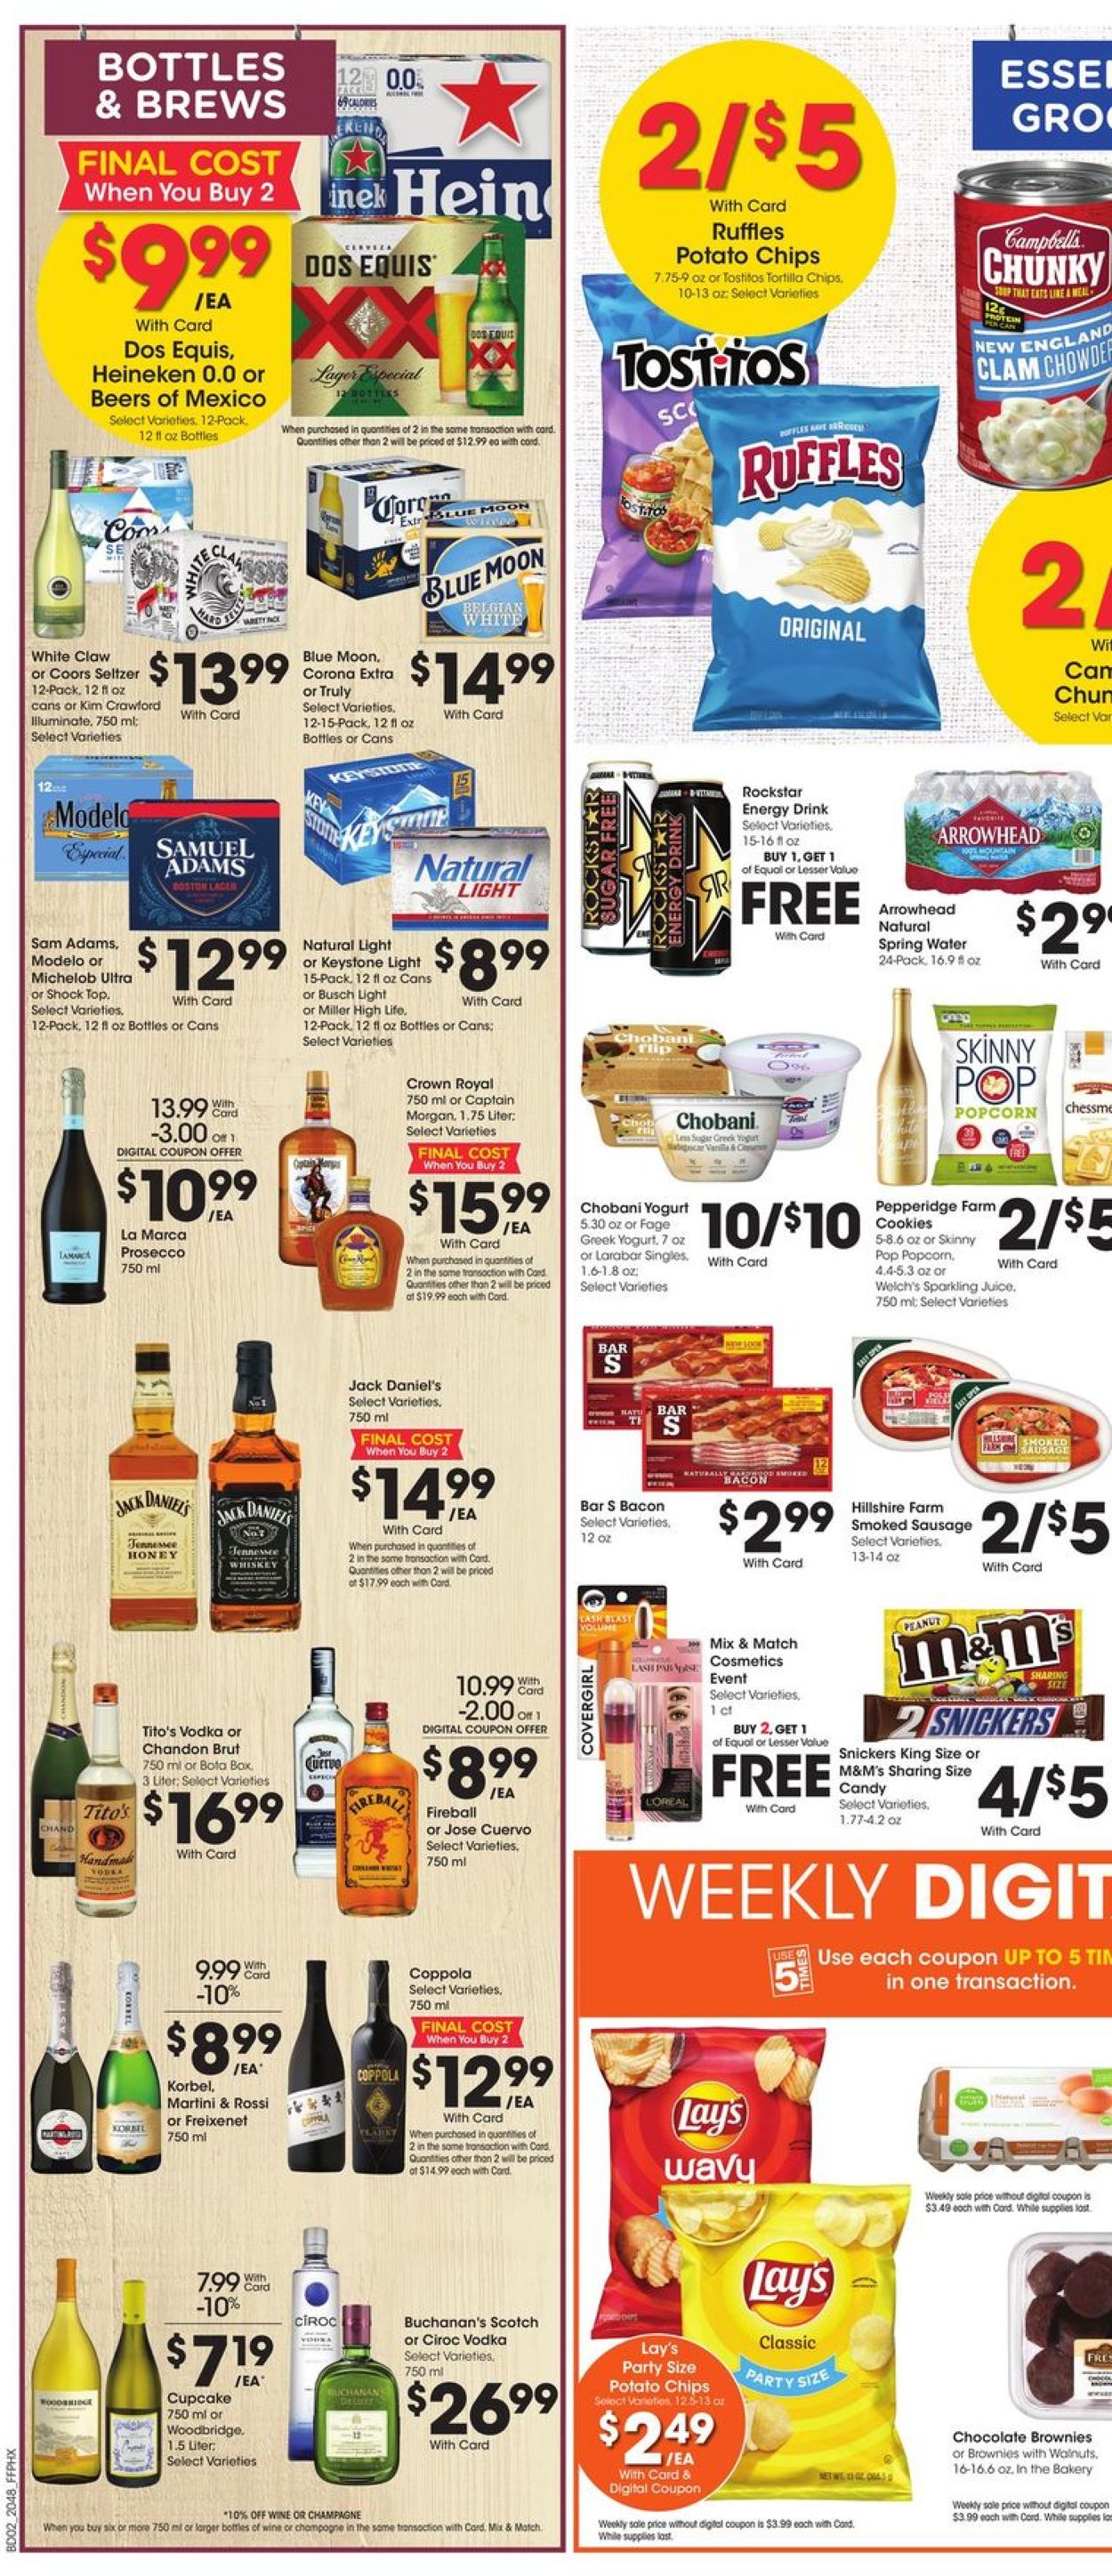 Fry’s Current weekly ad 12/30 - 01/05/2021 [4] - frequent-ads.com